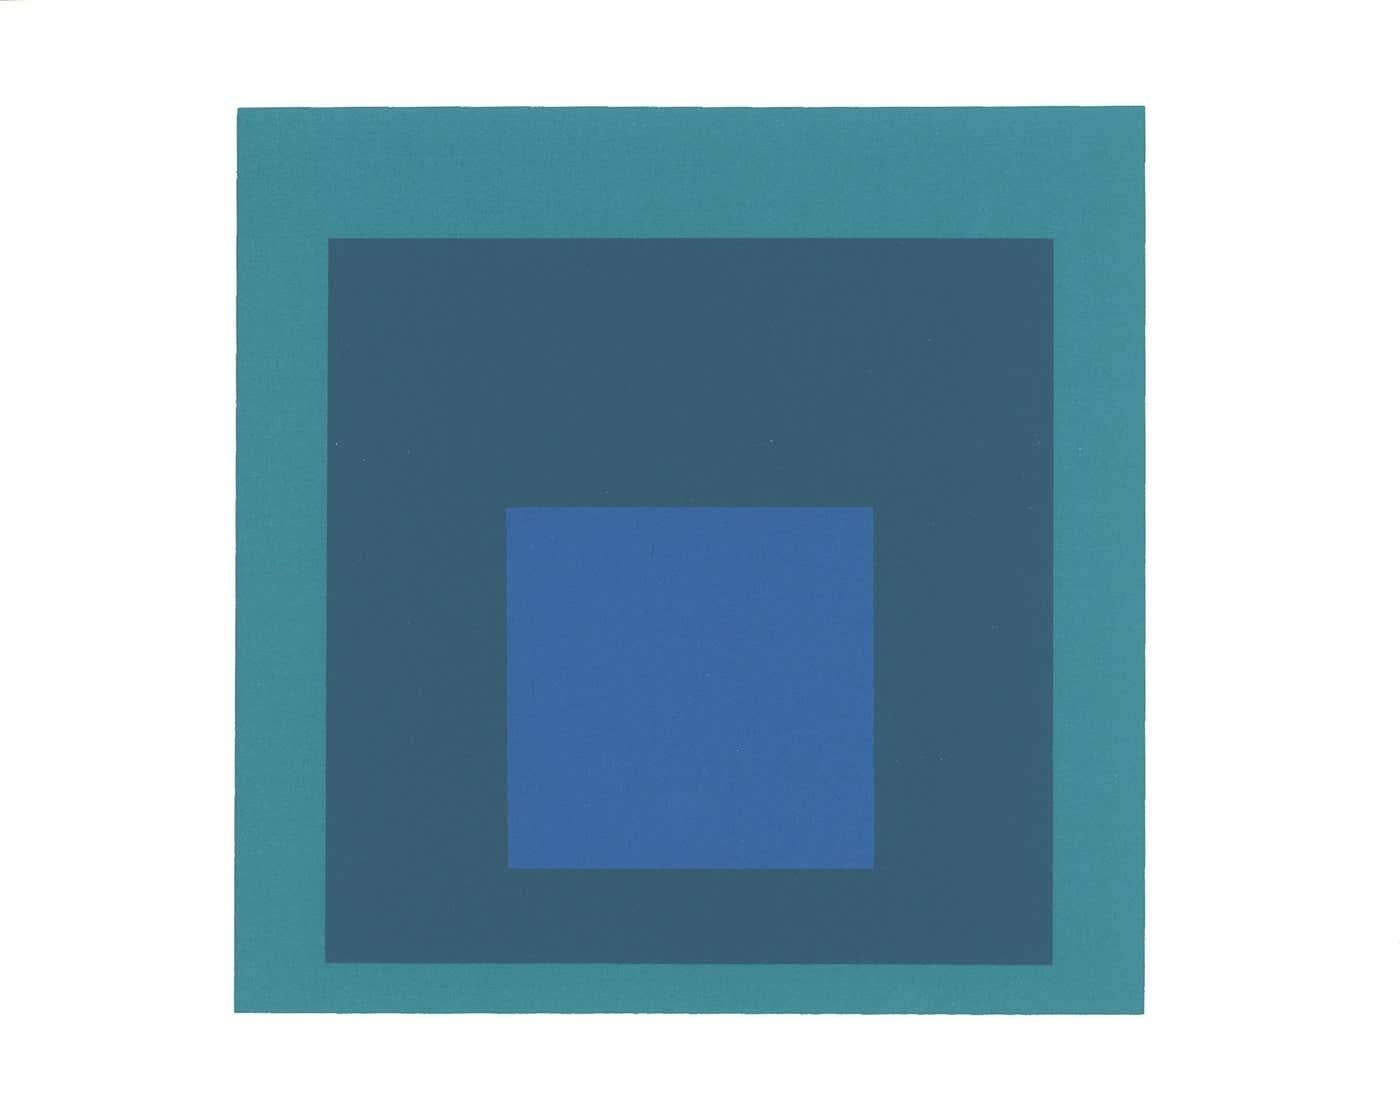 Josef Albers Homage to the Square 1964 (set of printed works):
A set of 4 screen-printed inserts from the 1964 exhibition catalogue, Homage to the Square: 40 New Paintings by Josef Albers, Sidney Janis Gallery, New York, 1964. Well-suited for